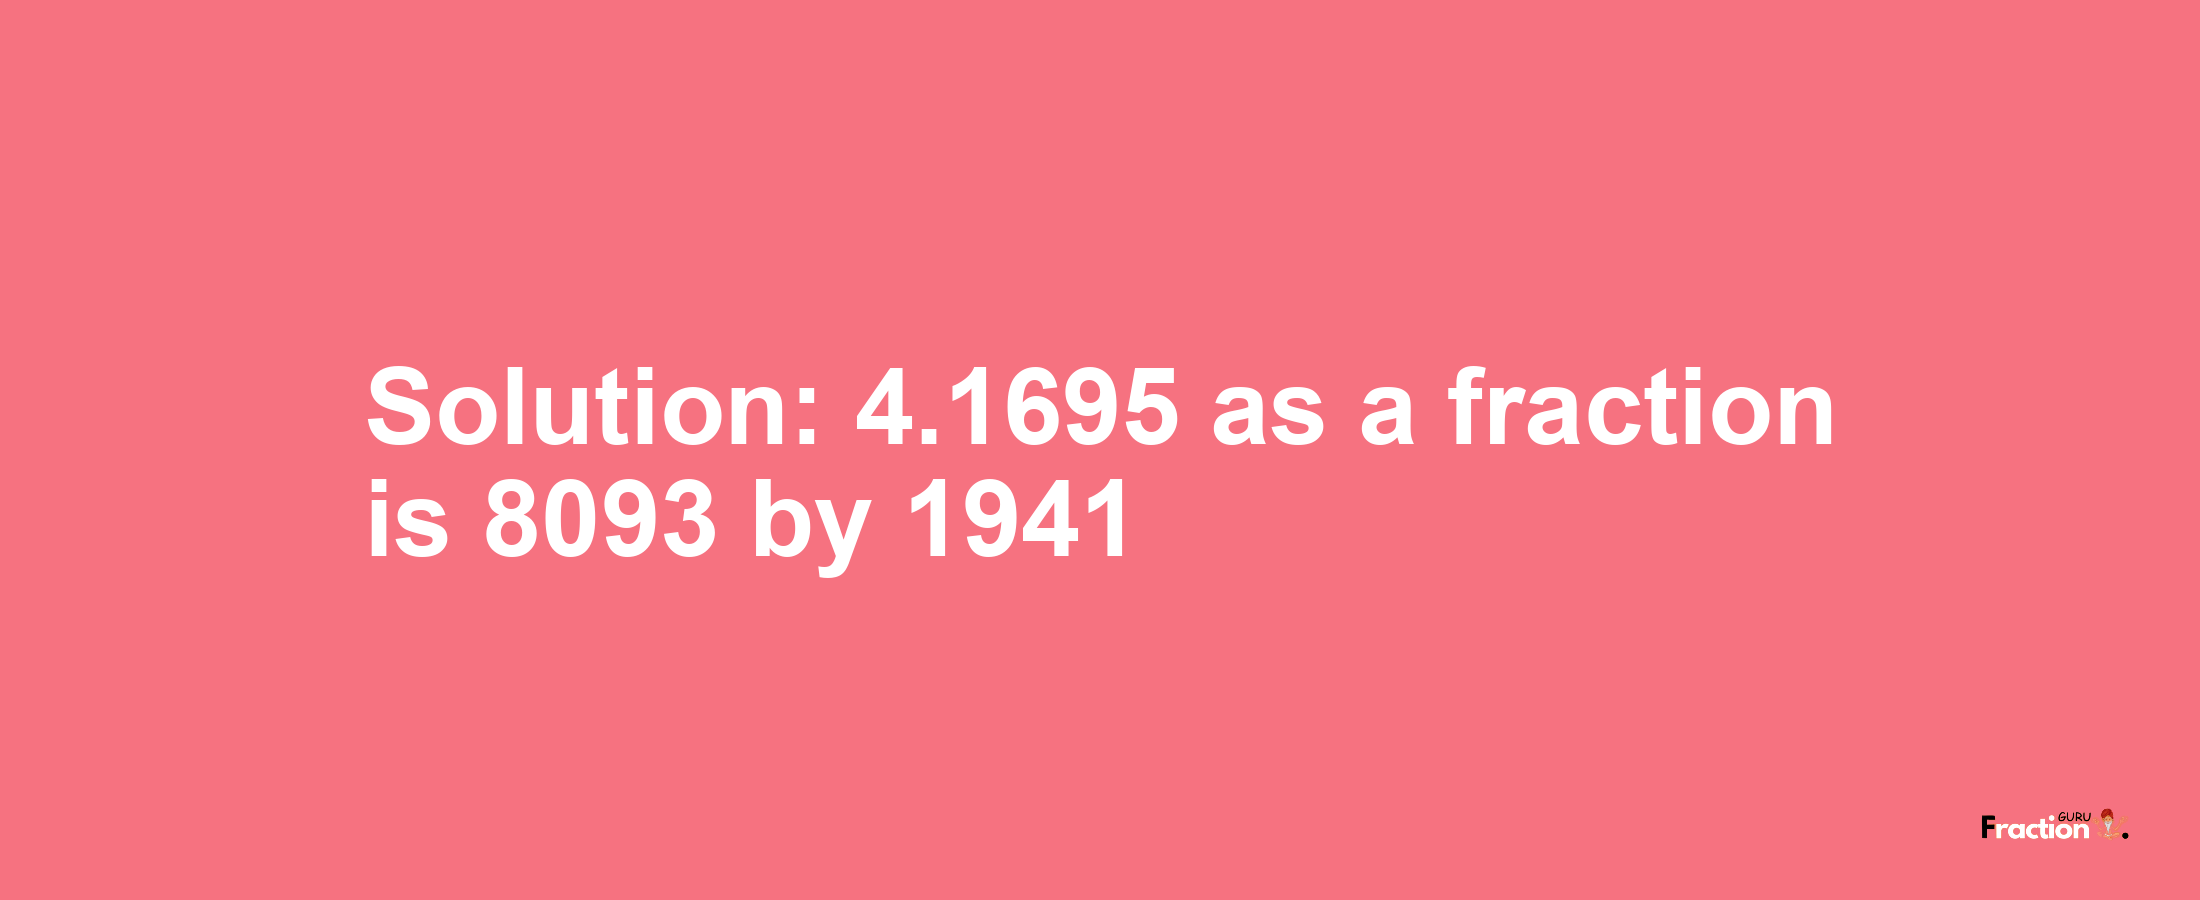 Solution:4.1695 as a fraction is 8093/1941